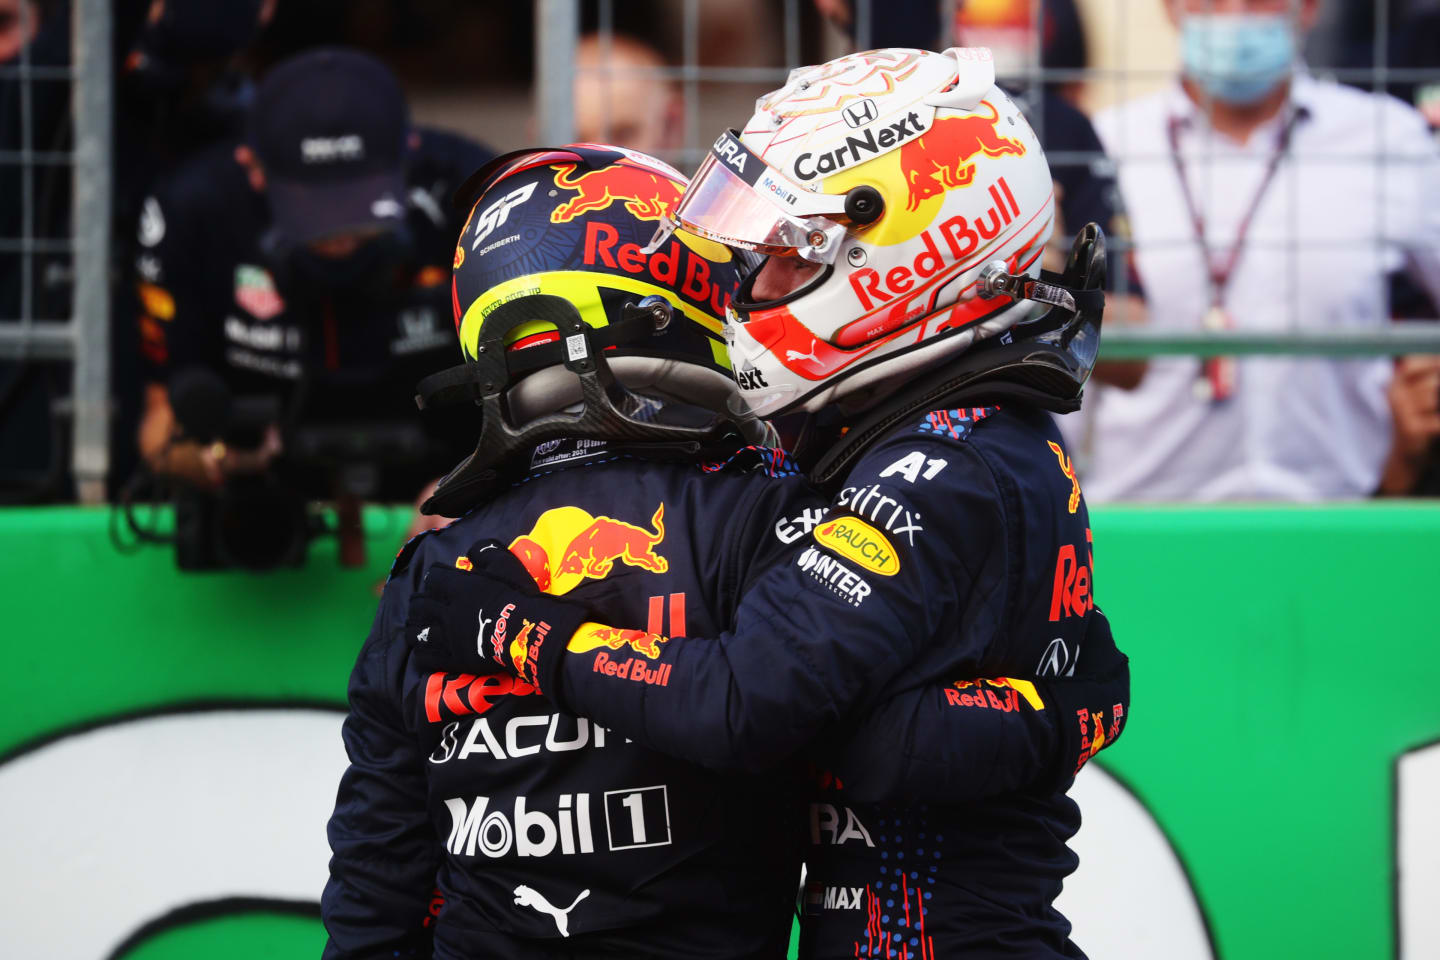 AUSTIN, TEXAS - OCTOBER 23: First place qualifier Max Verstappen of Netherlands and Red Bull Racing and third place qualifier Sergio Perez of Mexico and Red Bull Racing celebrate in parc ferme during qualifying ahead of the F1 Grand Prix of USA at Circuit of The Americas on October 23, 2021 in Austin, Texas. (Photo by Chris Graythen/Getty Images)